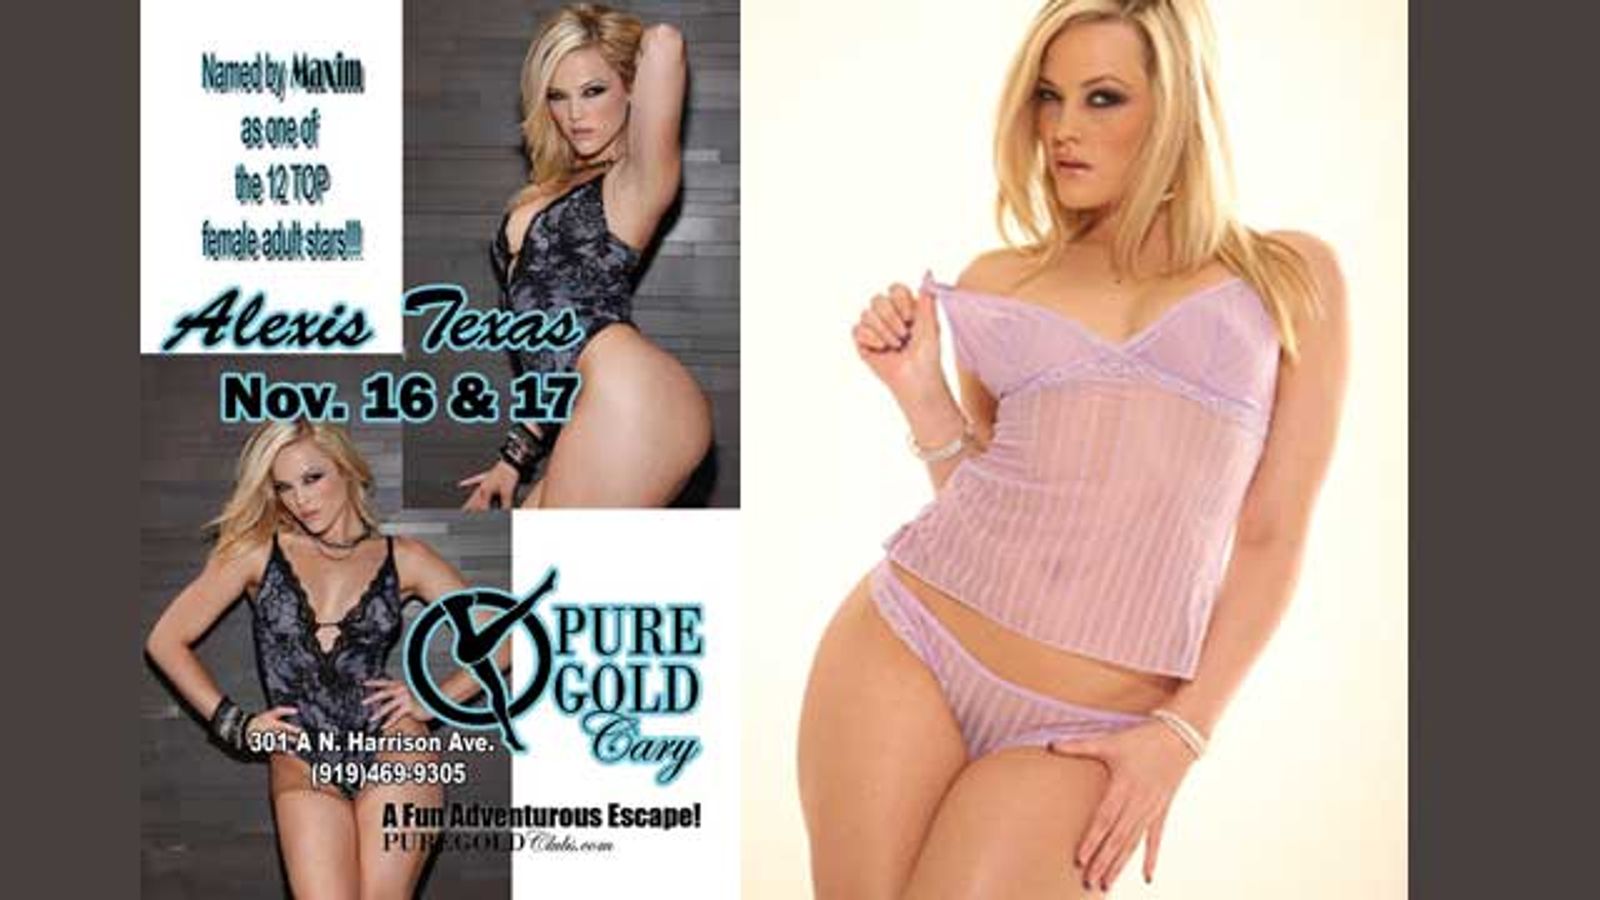 Alexis Texas Brings Her Big Booty to NC for Two Nights